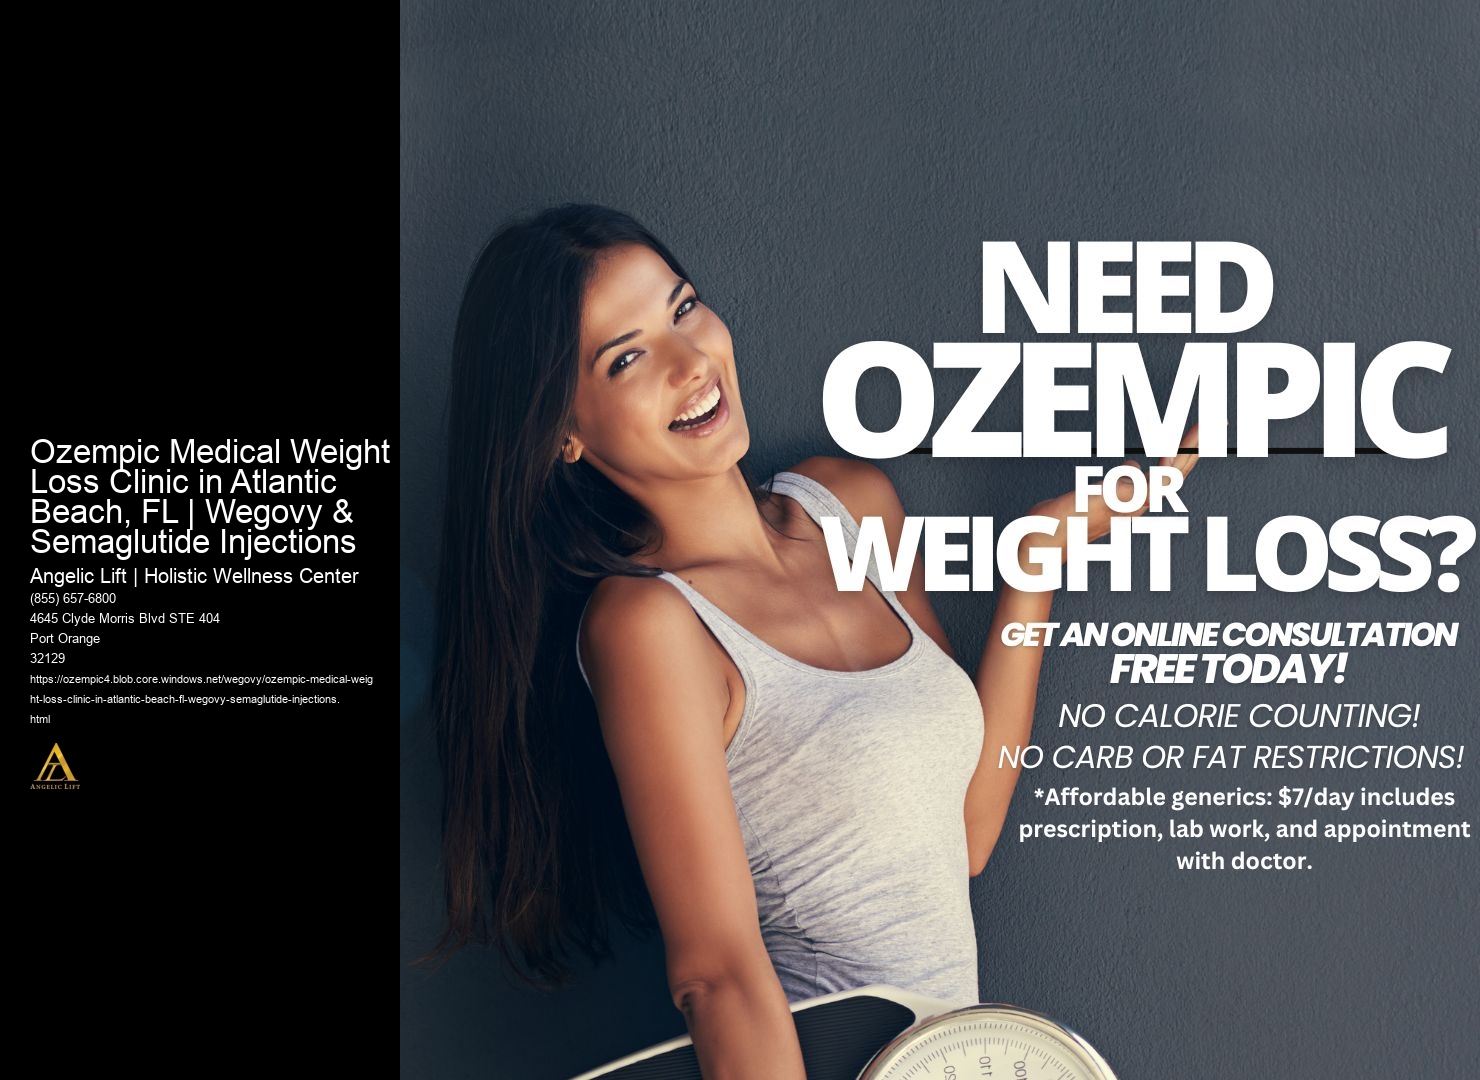 Ozempic Medical Weight Loss Clinic in Atlantic Beach, FL | Wegovy & Semaglutide Injections